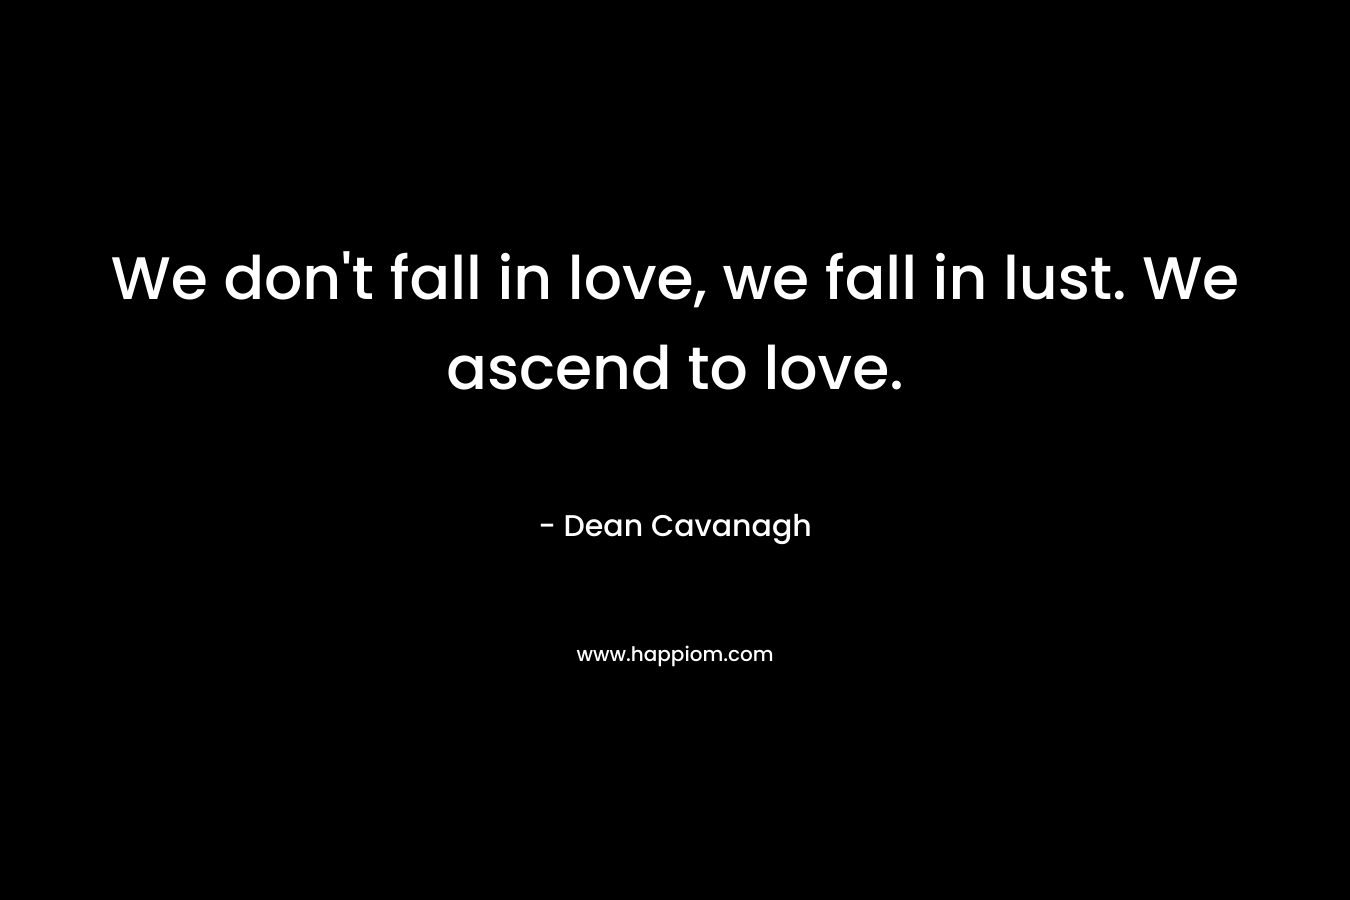 We don’t fall in love, we fall in lust. We ascend to love. – Dean Cavanagh